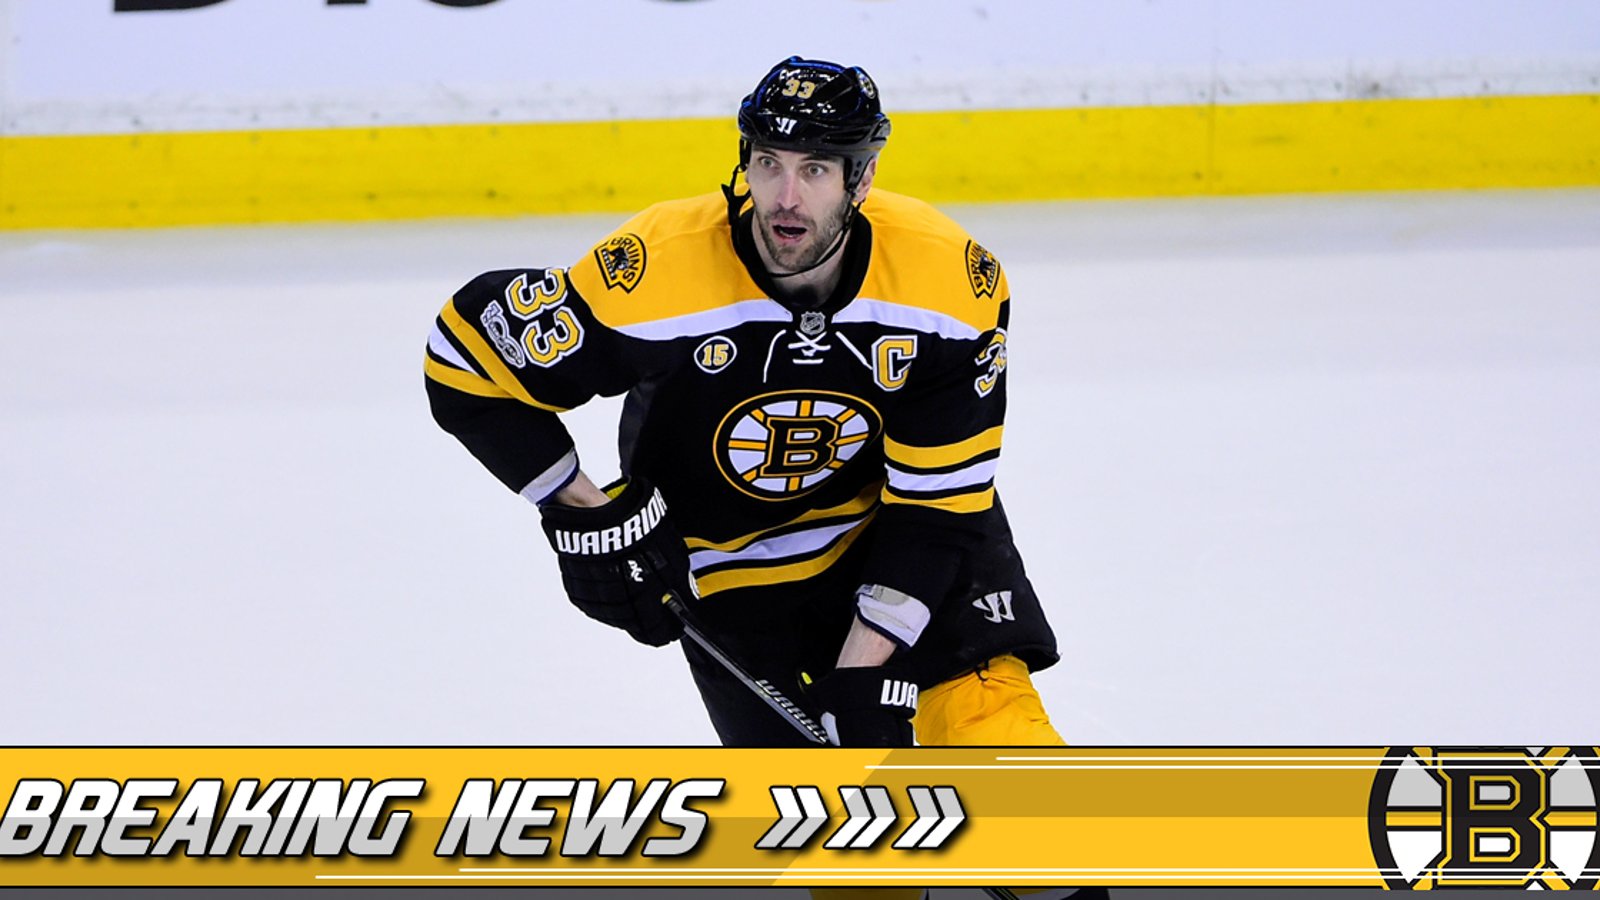 BREAKING: Zdeno Chara opens up on his future in the NHL after early playoffs elimination.